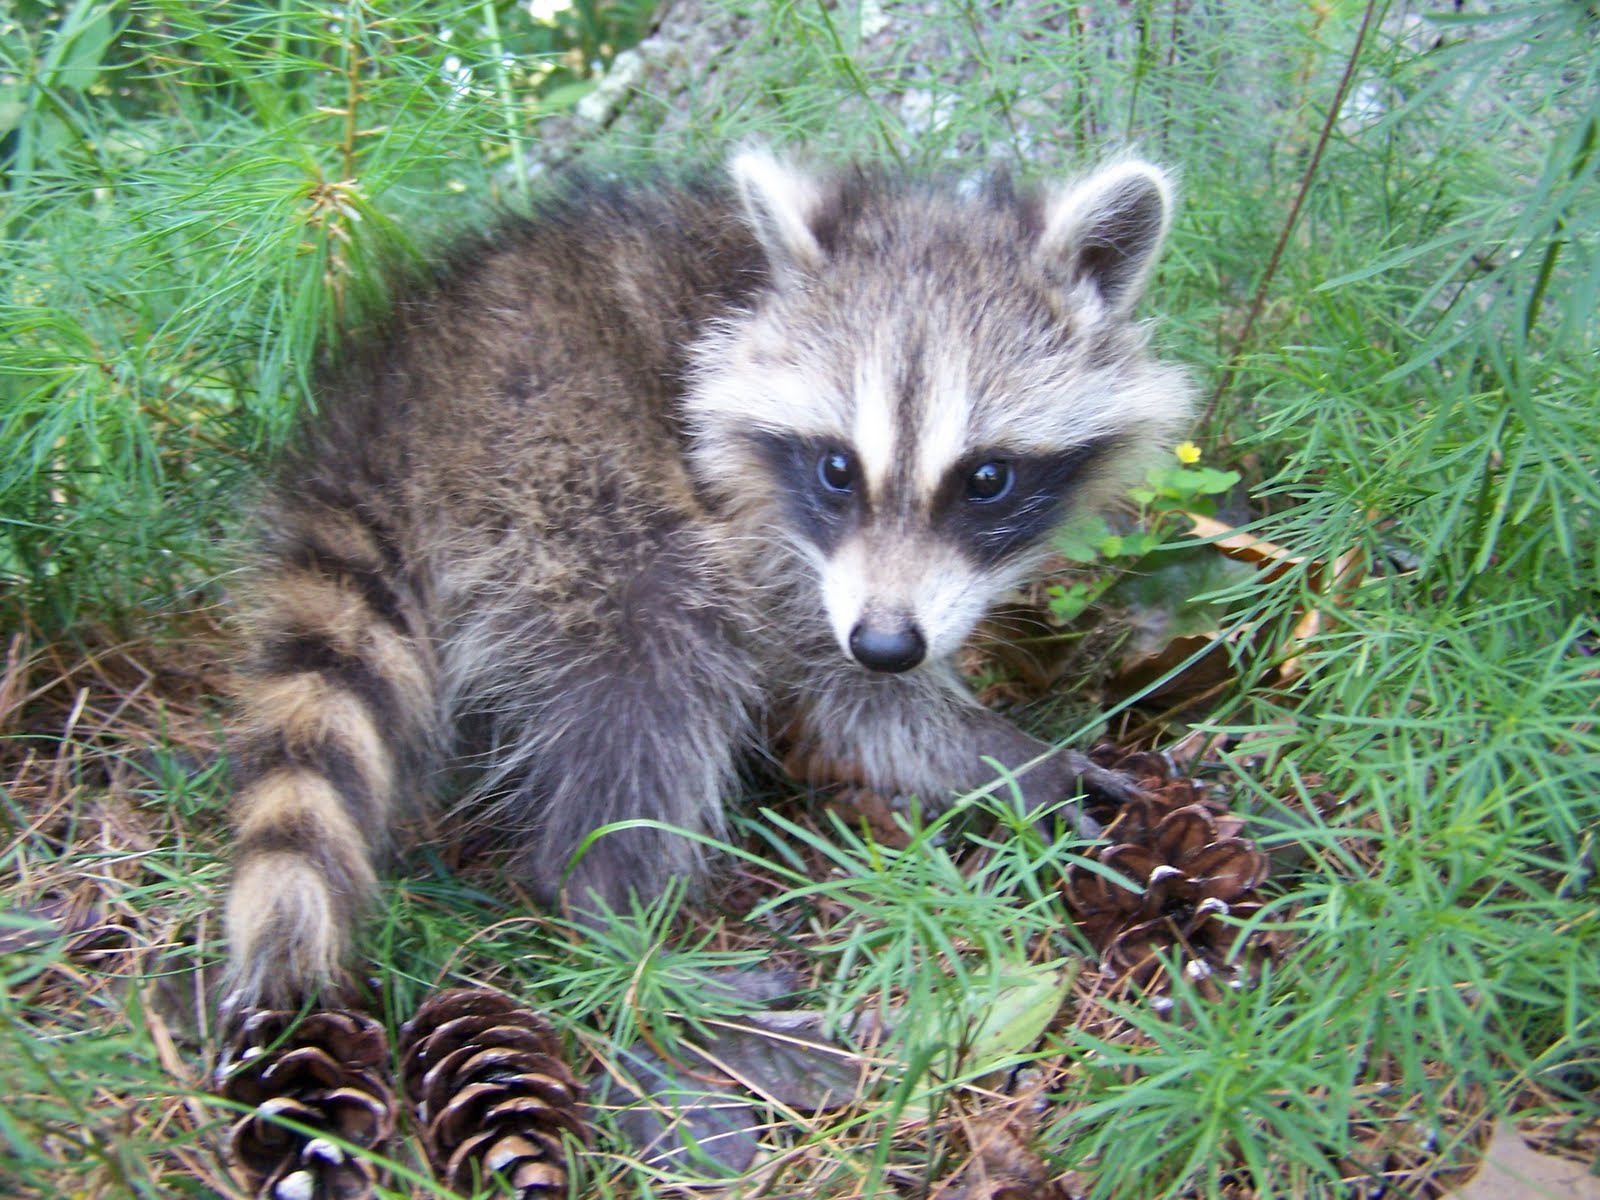 The Laughing Raccoon: July 2010